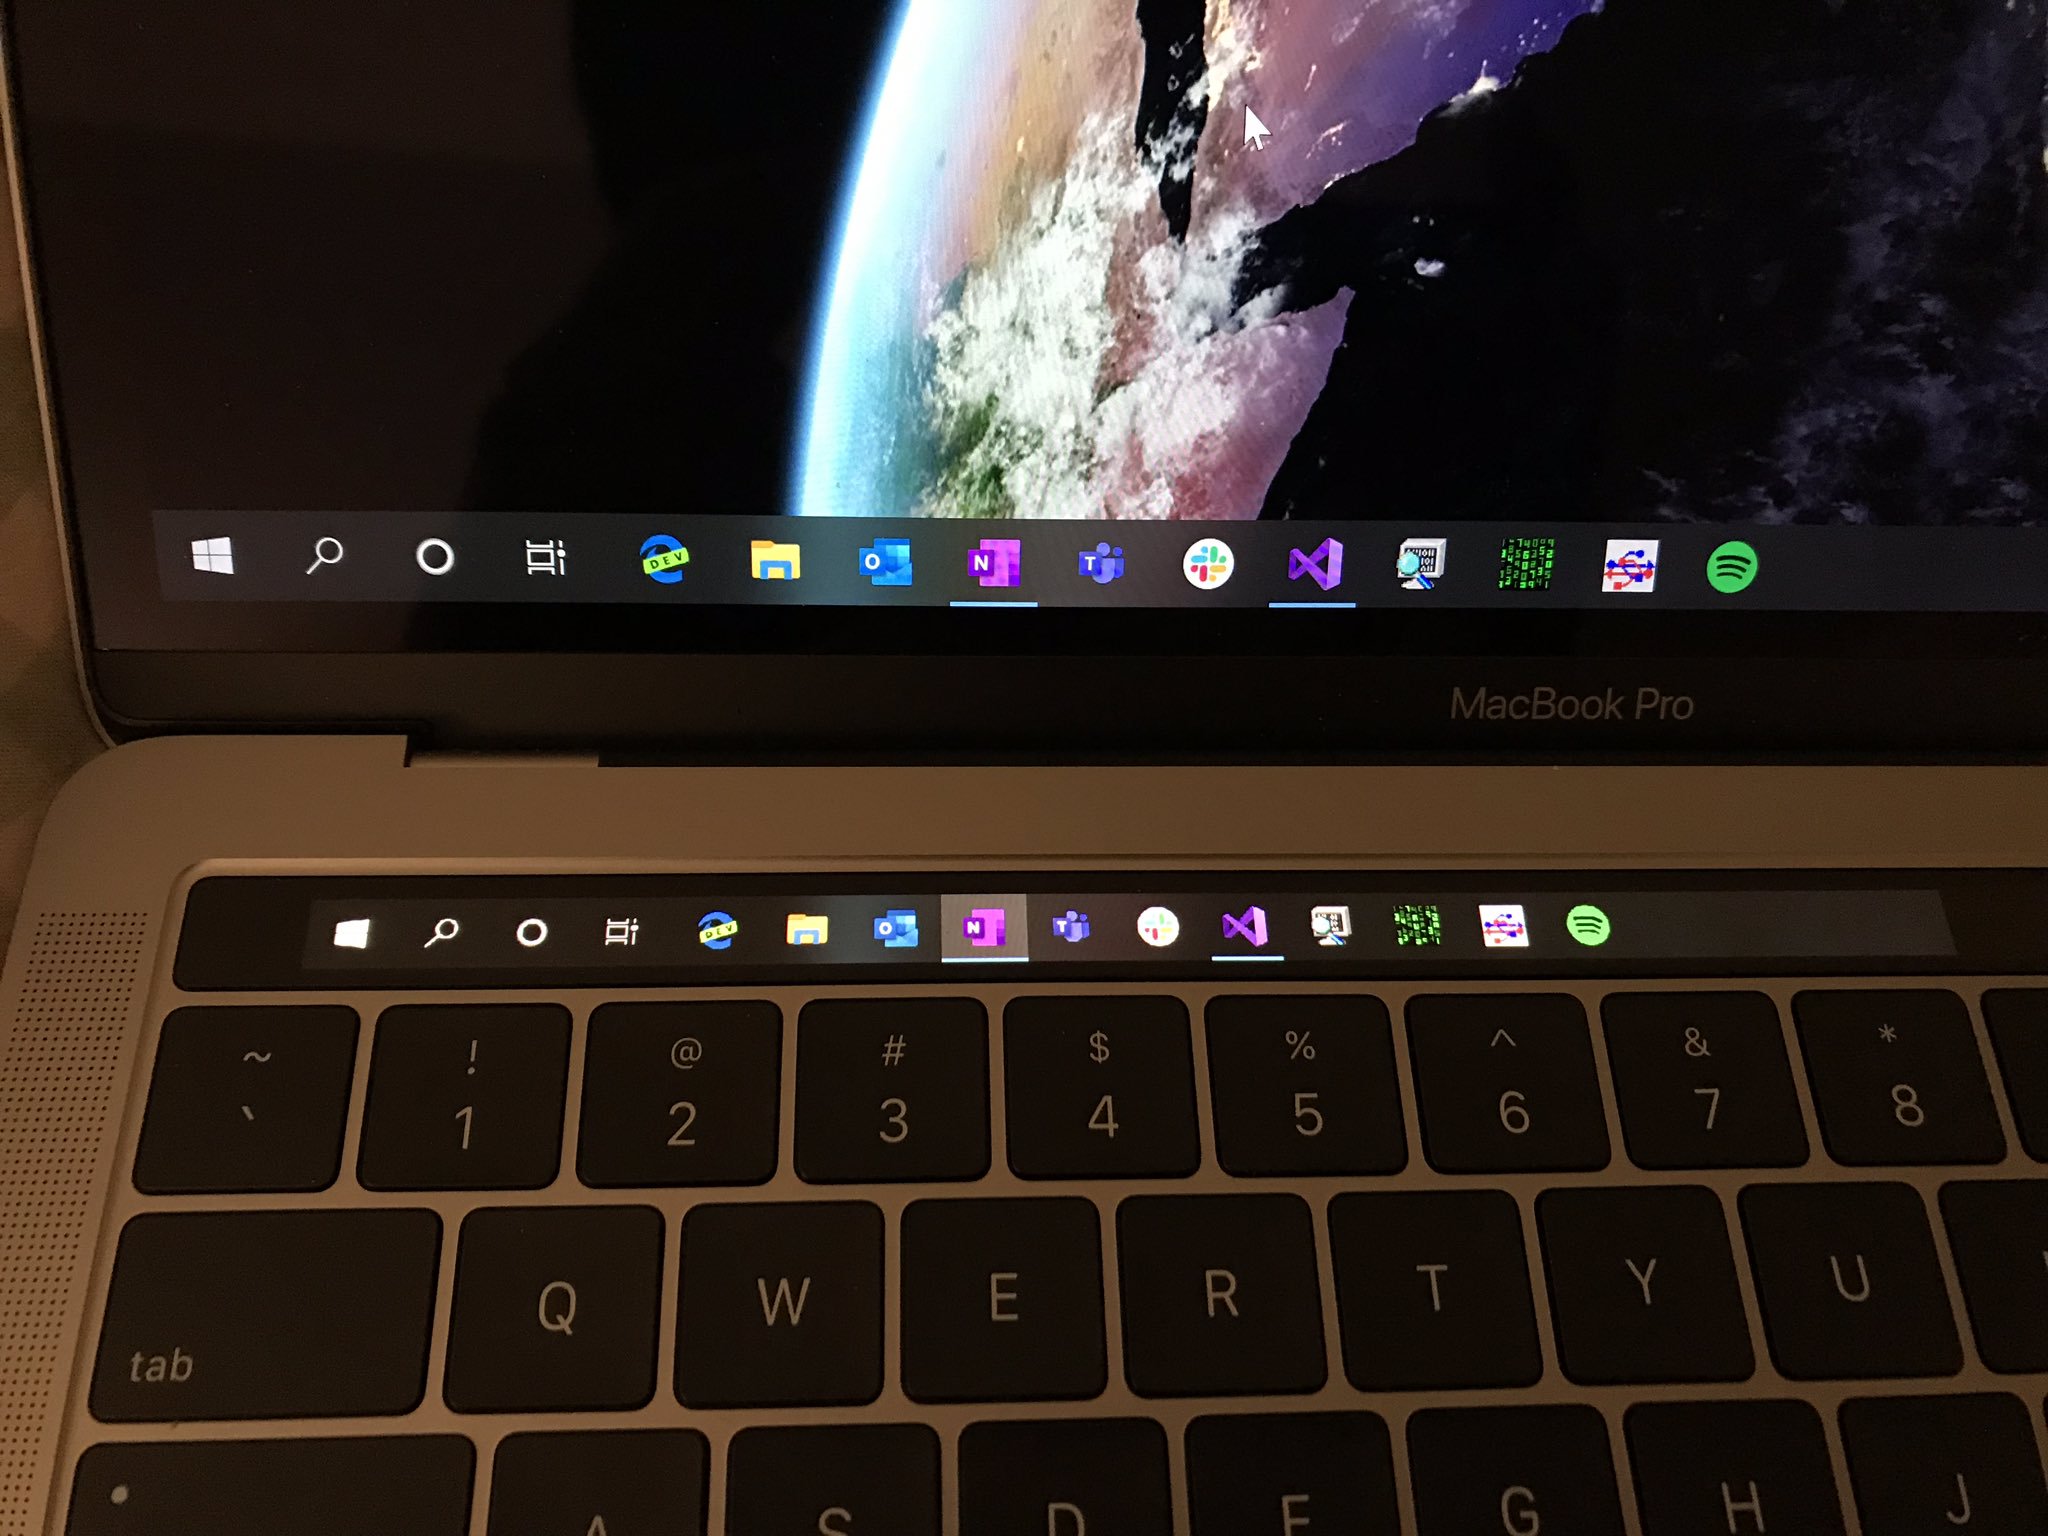 MacBook Pro's Touch Bar finally comes alive under Windows 10